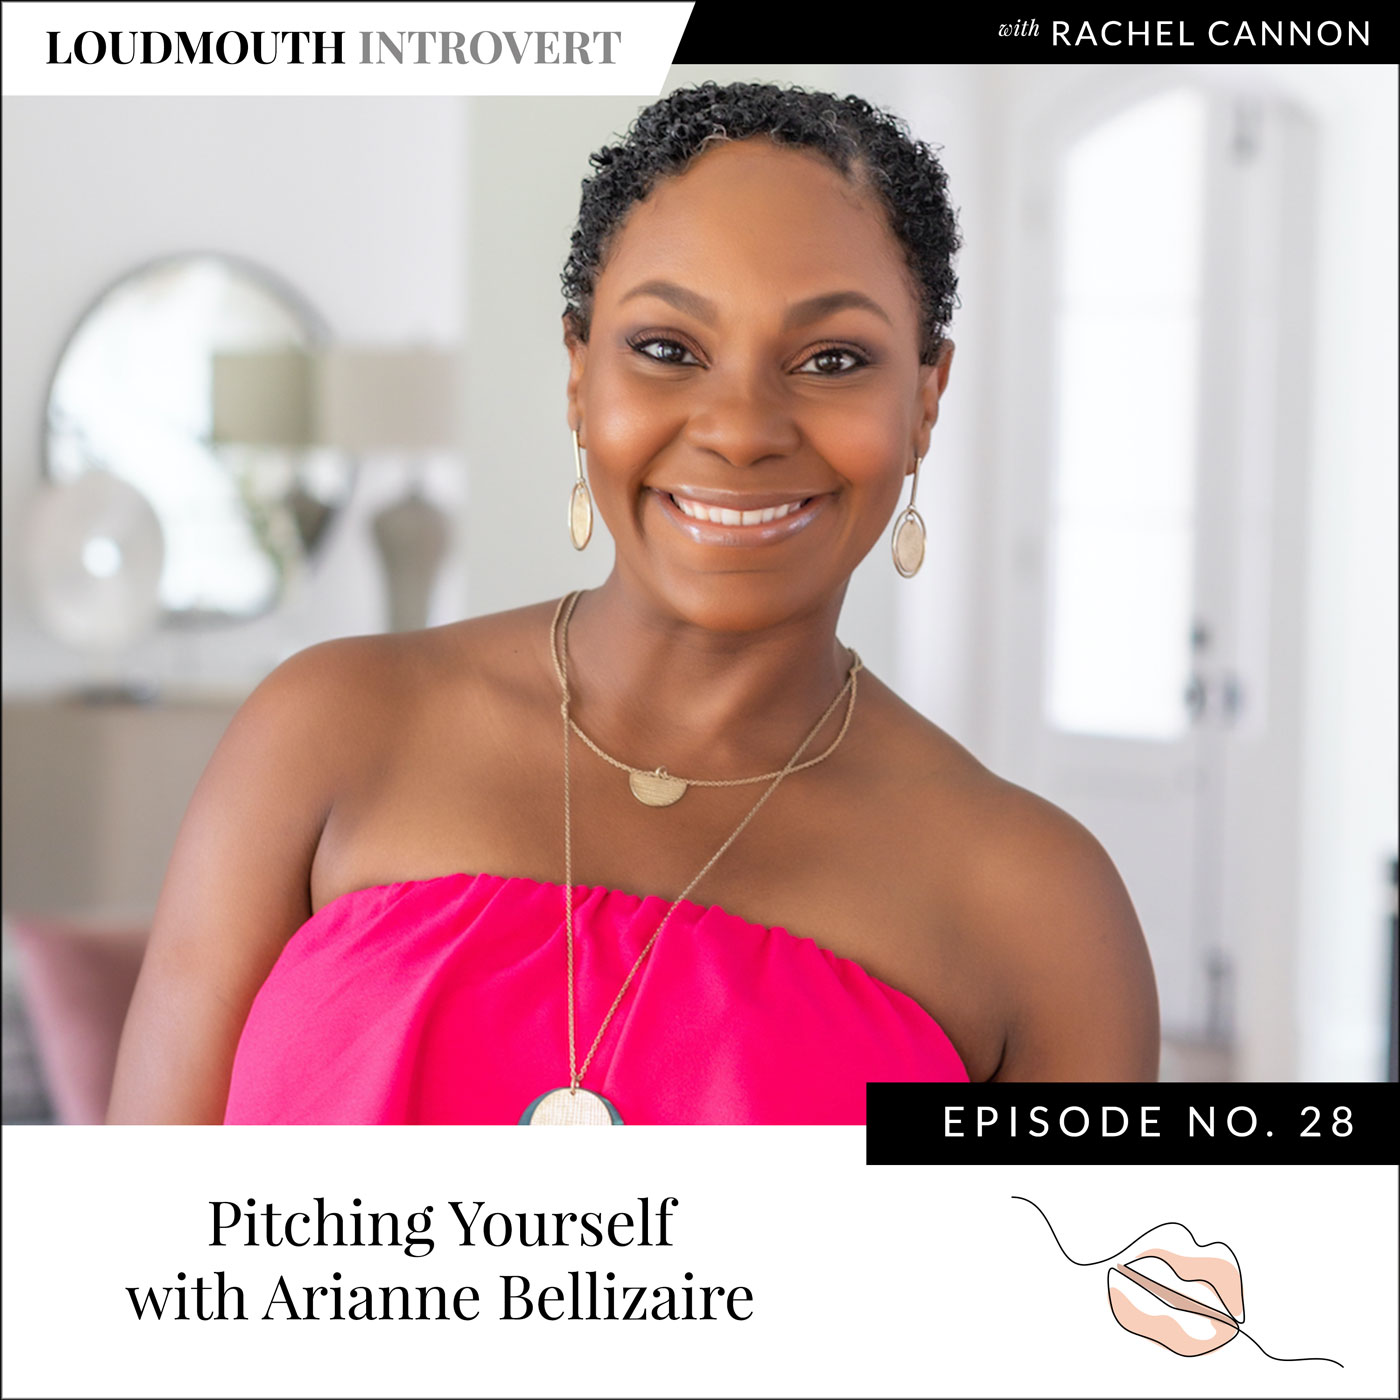 Pitching Yourself with Arianne Bellizaire